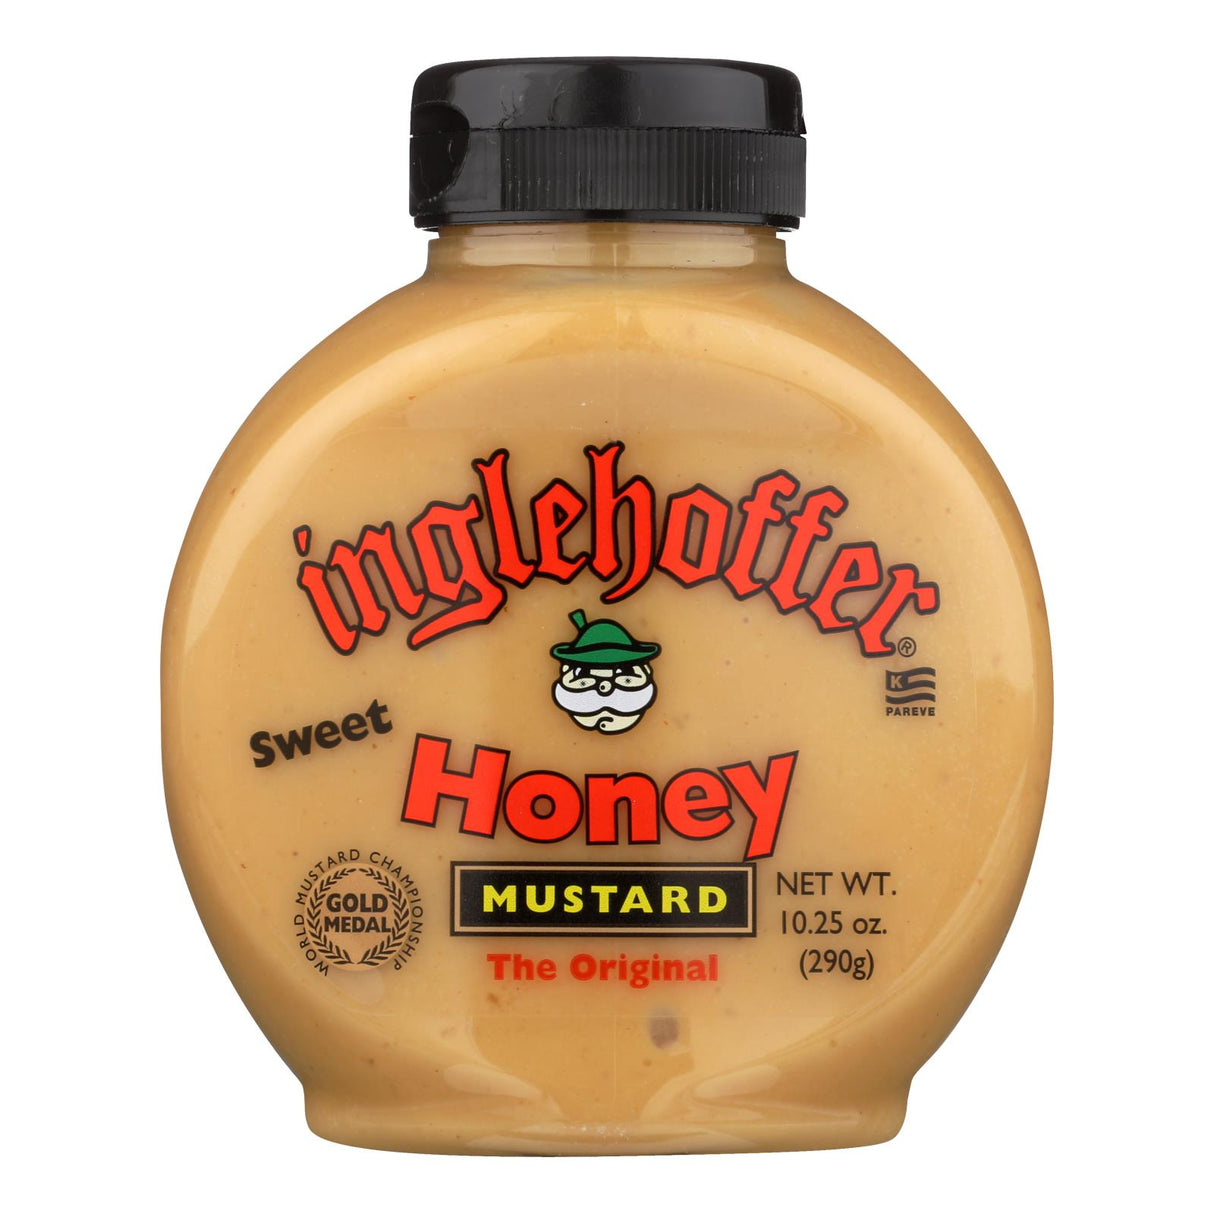 Inglehoffer Sweet and Tangy Honey Mustard (Pack of 6 - 10.25 Oz.) - Cozy Farm 